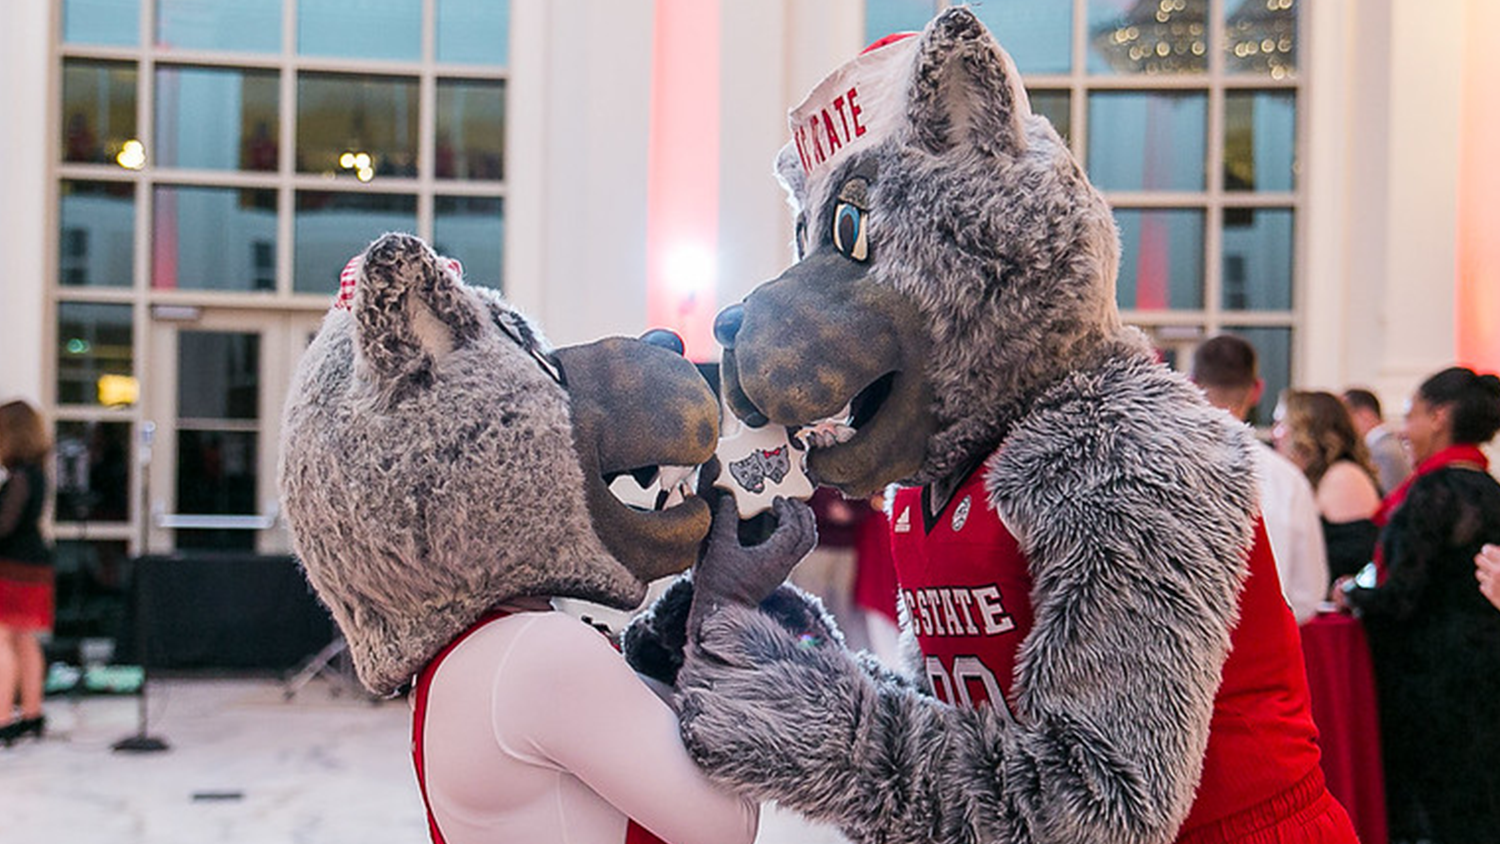 MR. and Ms. Wuf nose to nose for Valentine's Day